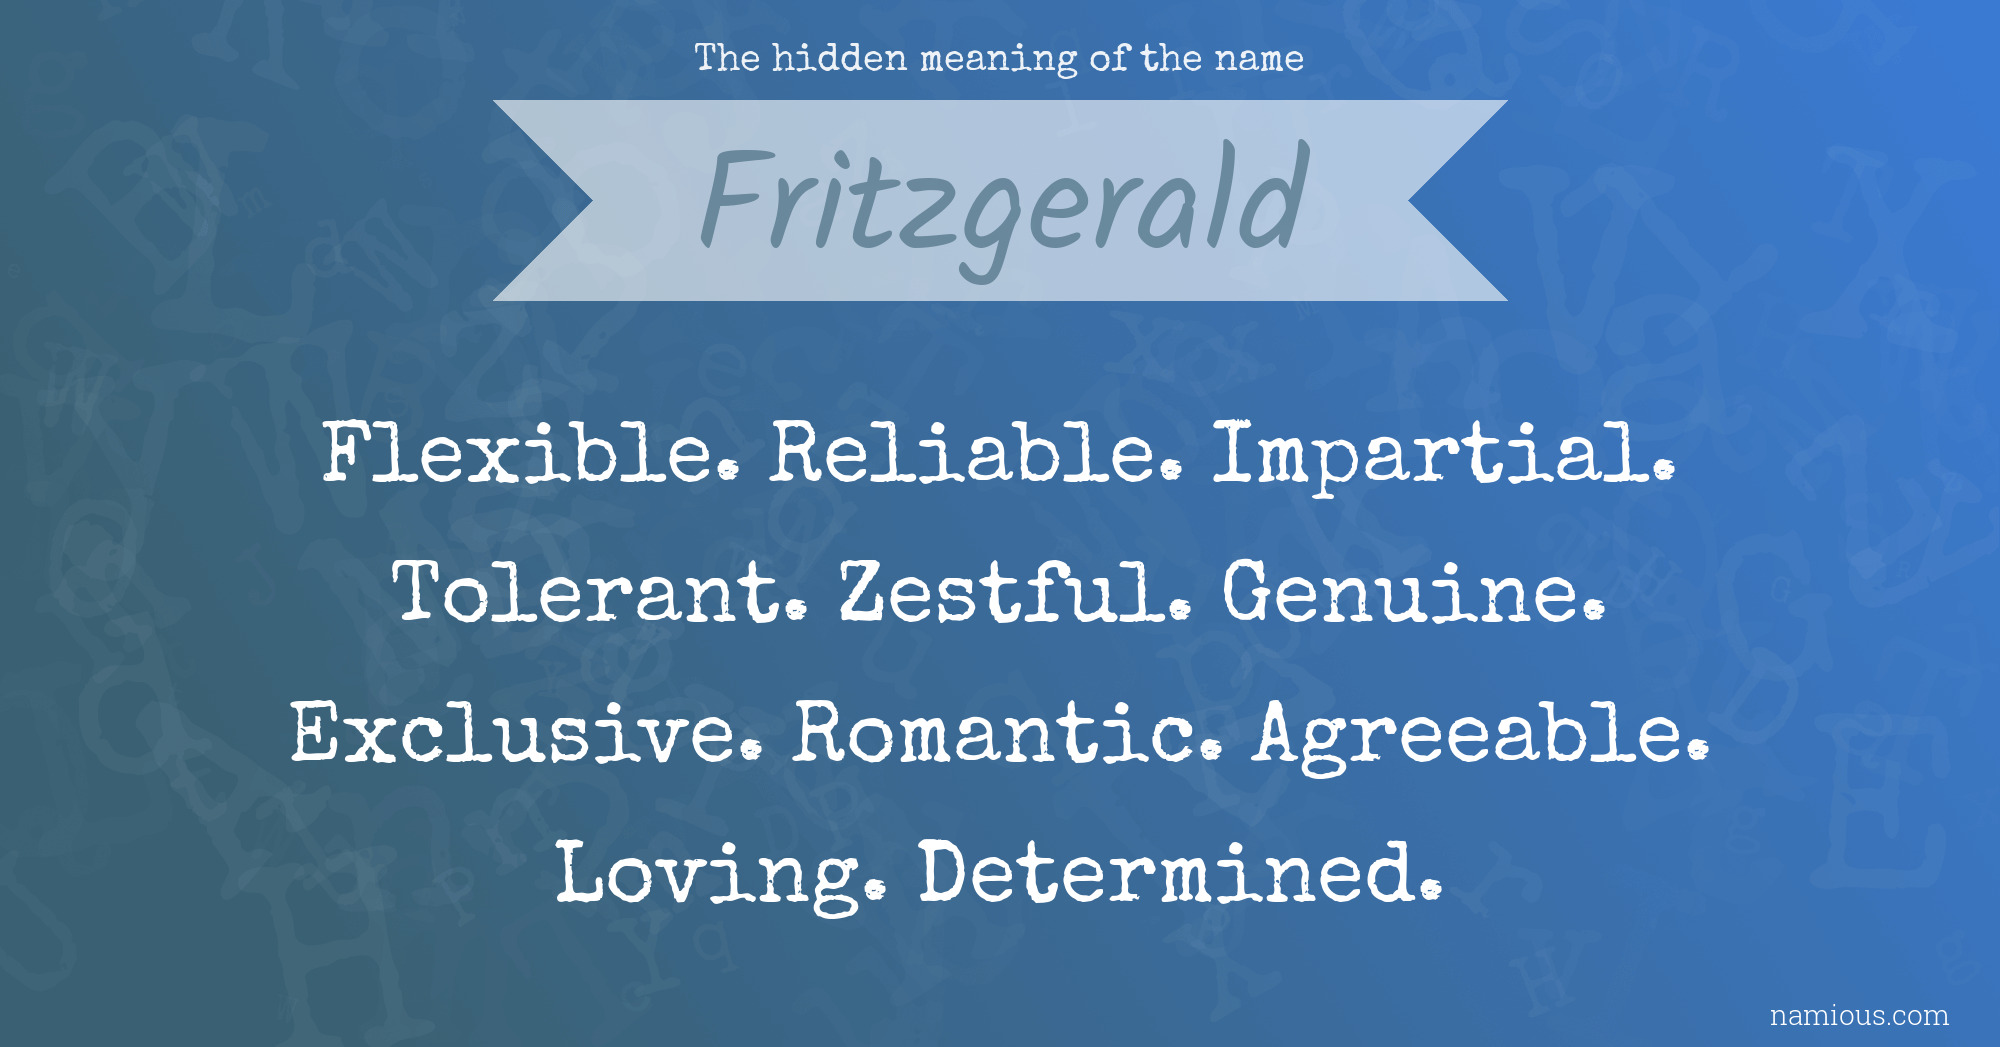 The hidden meaning of the name Fritzgerald